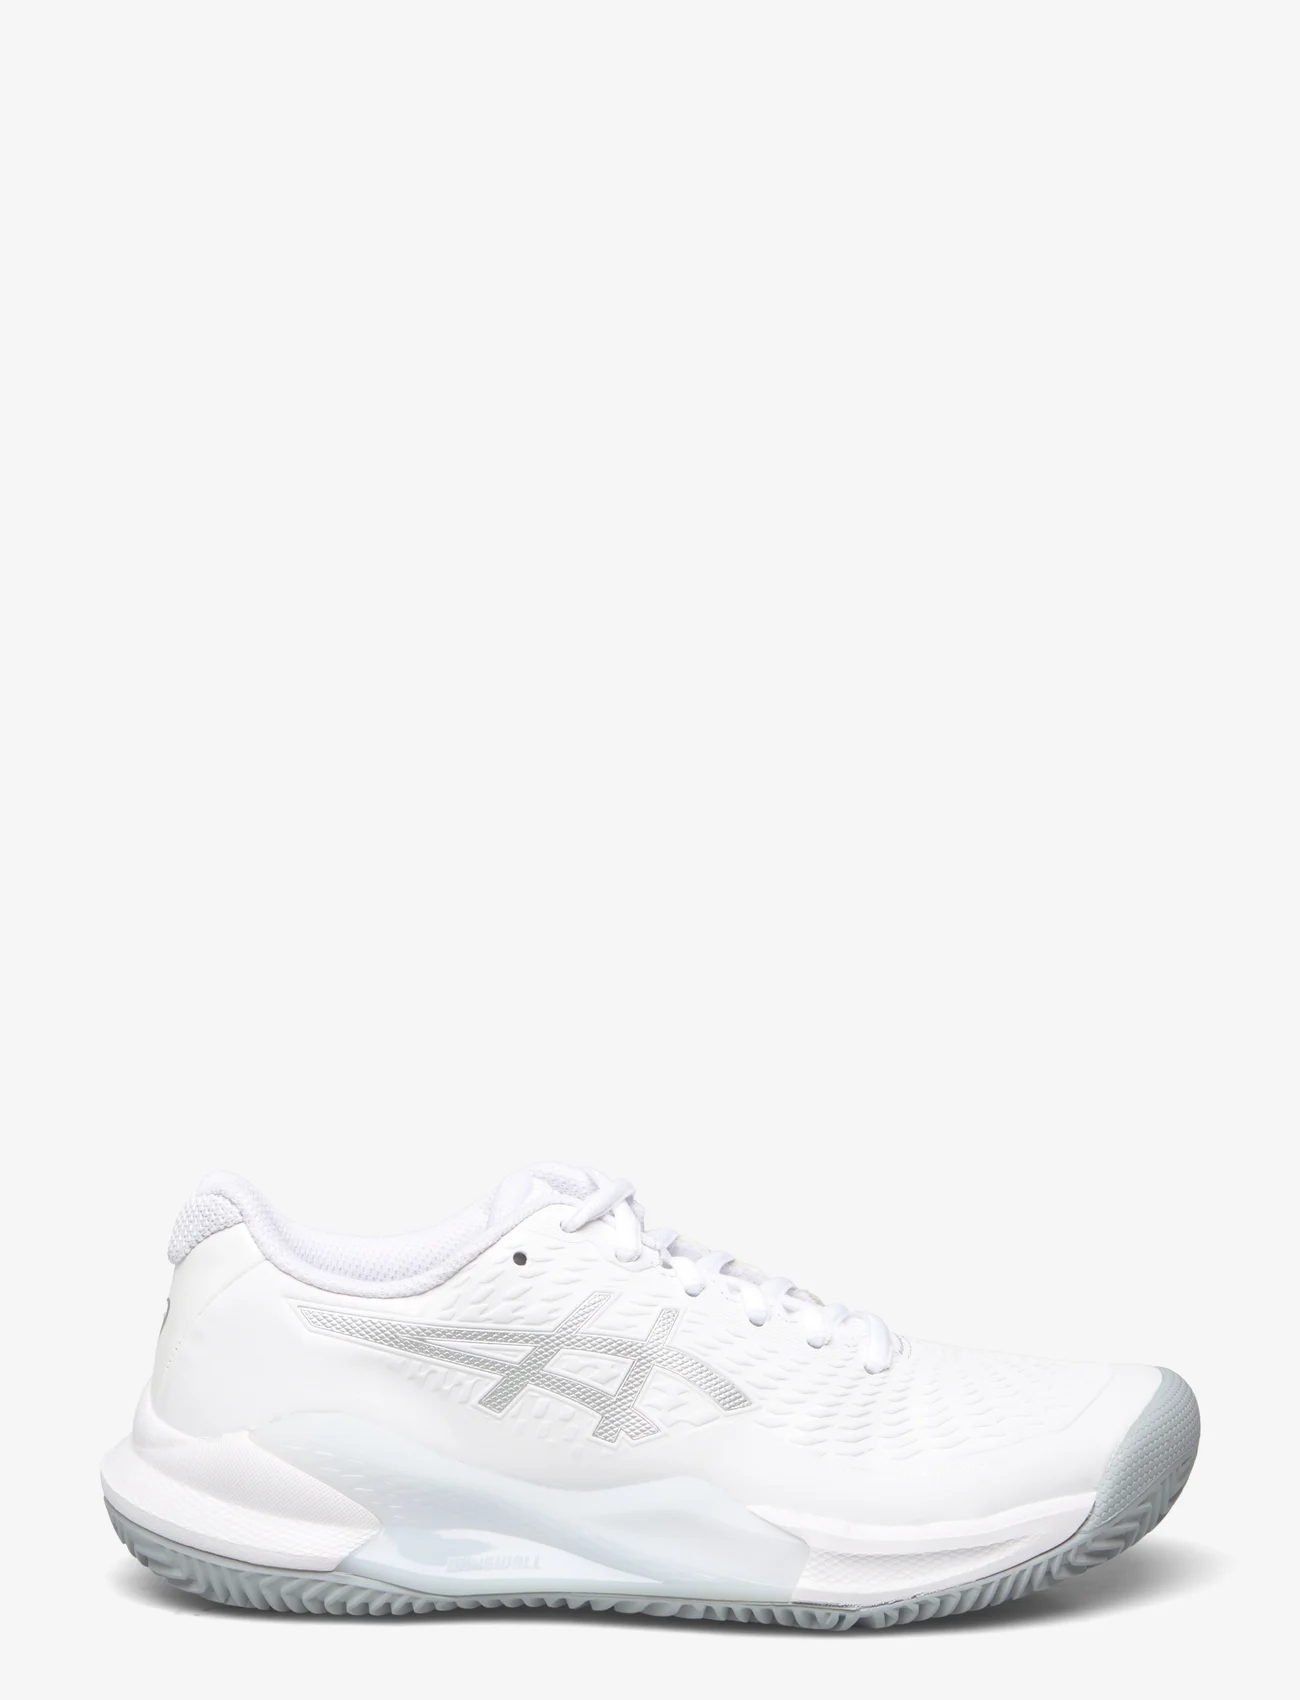 Asics - GEL-CHALLENGER 14 CLAY - racketsports shoes - white/pure silver - 1